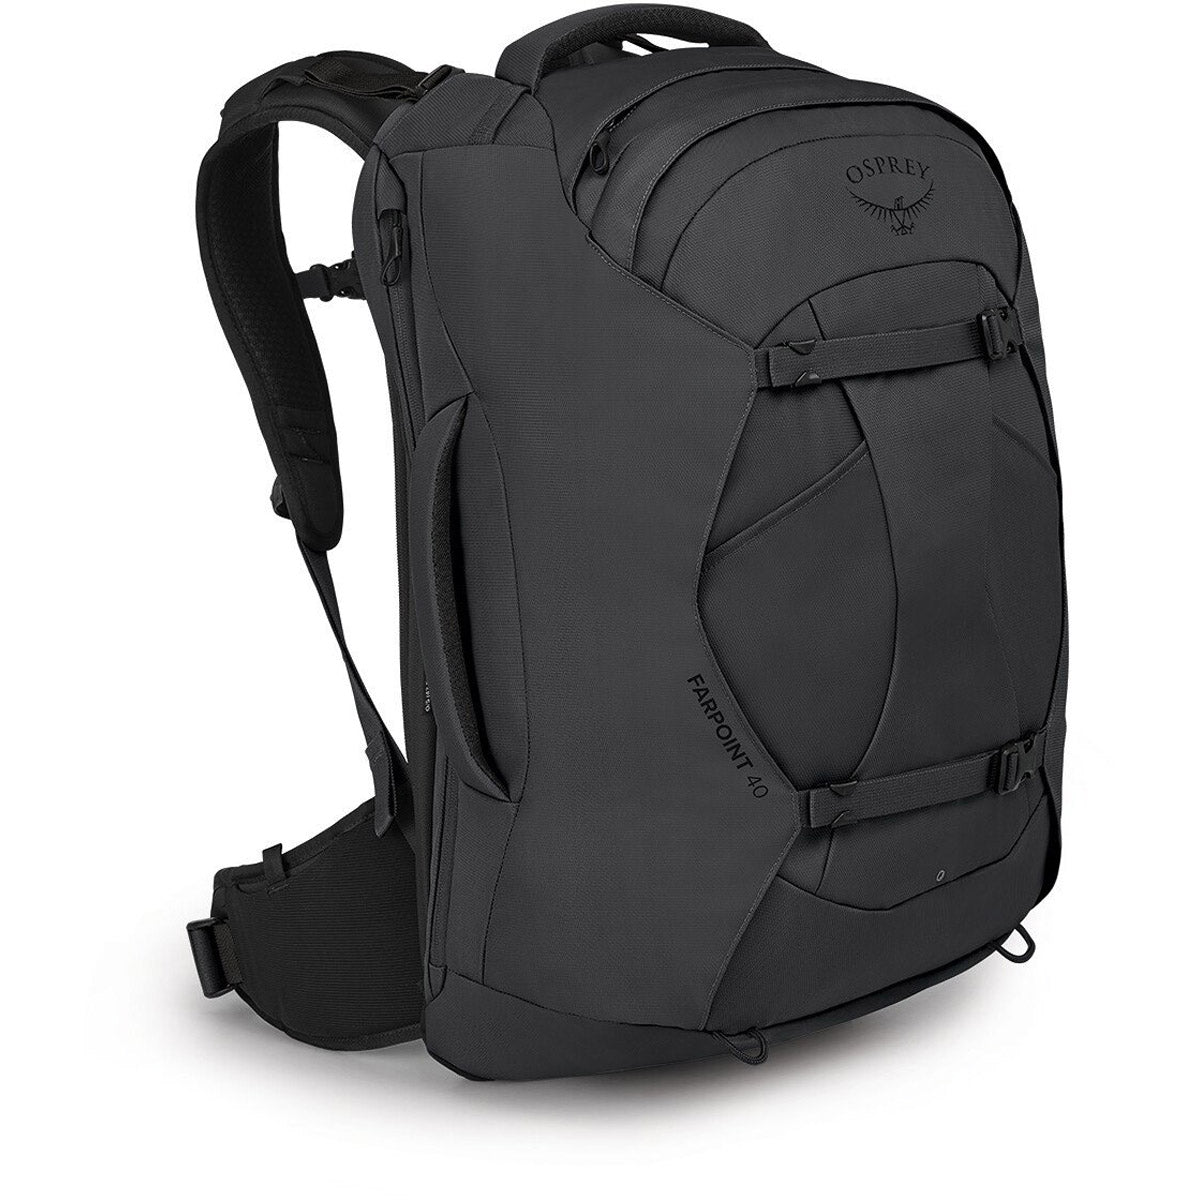 Farpoint 40 Travel Pack